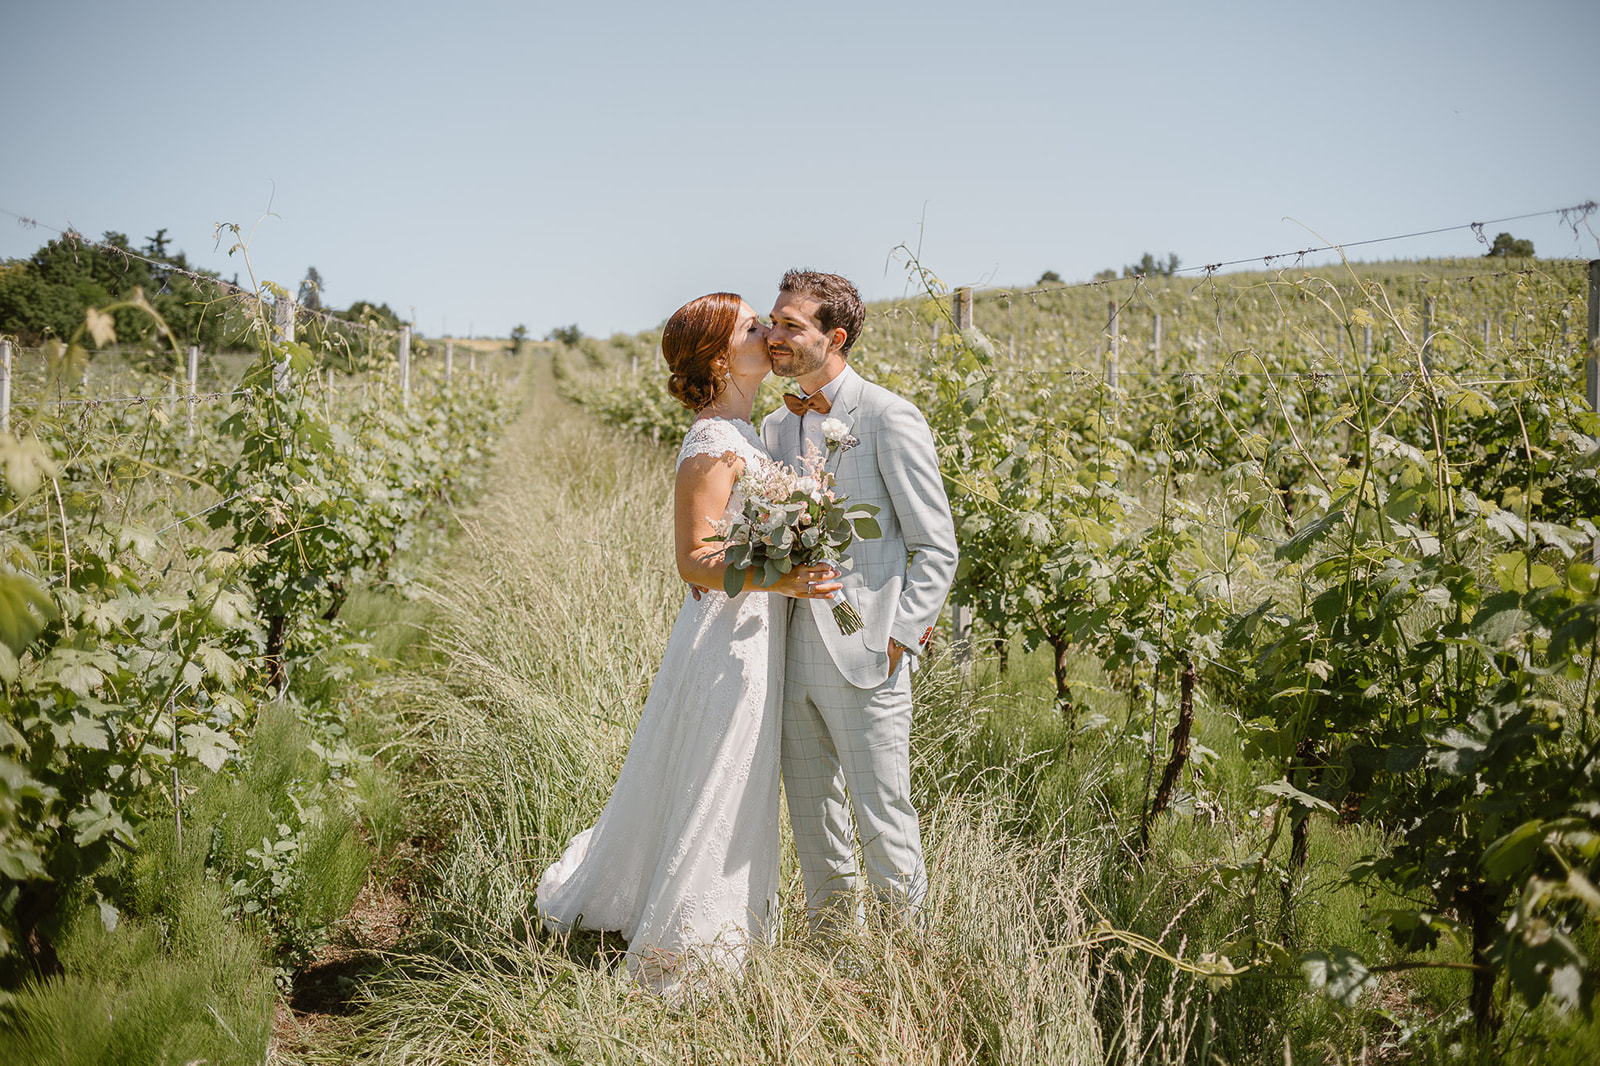 Couple photo in the vineyard of bride and groom